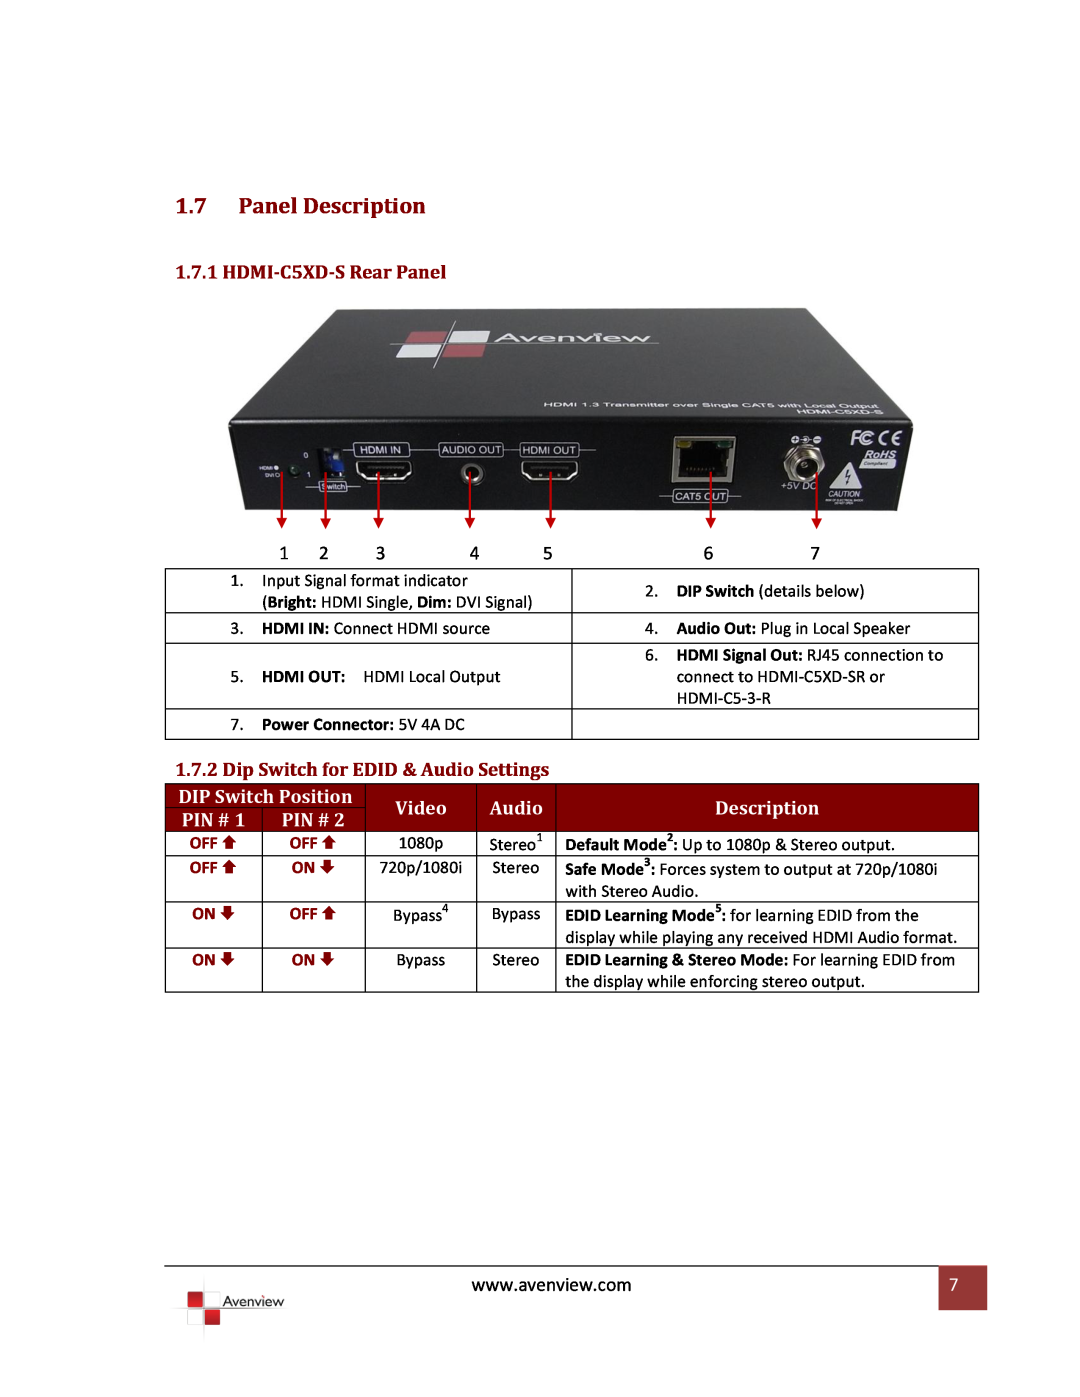 Avenview Panel Description, HDMI-C5XD-S Rear Panel, Dip Switch for EDID & Audio Settings, Hdmi Out, Off , On , Video 